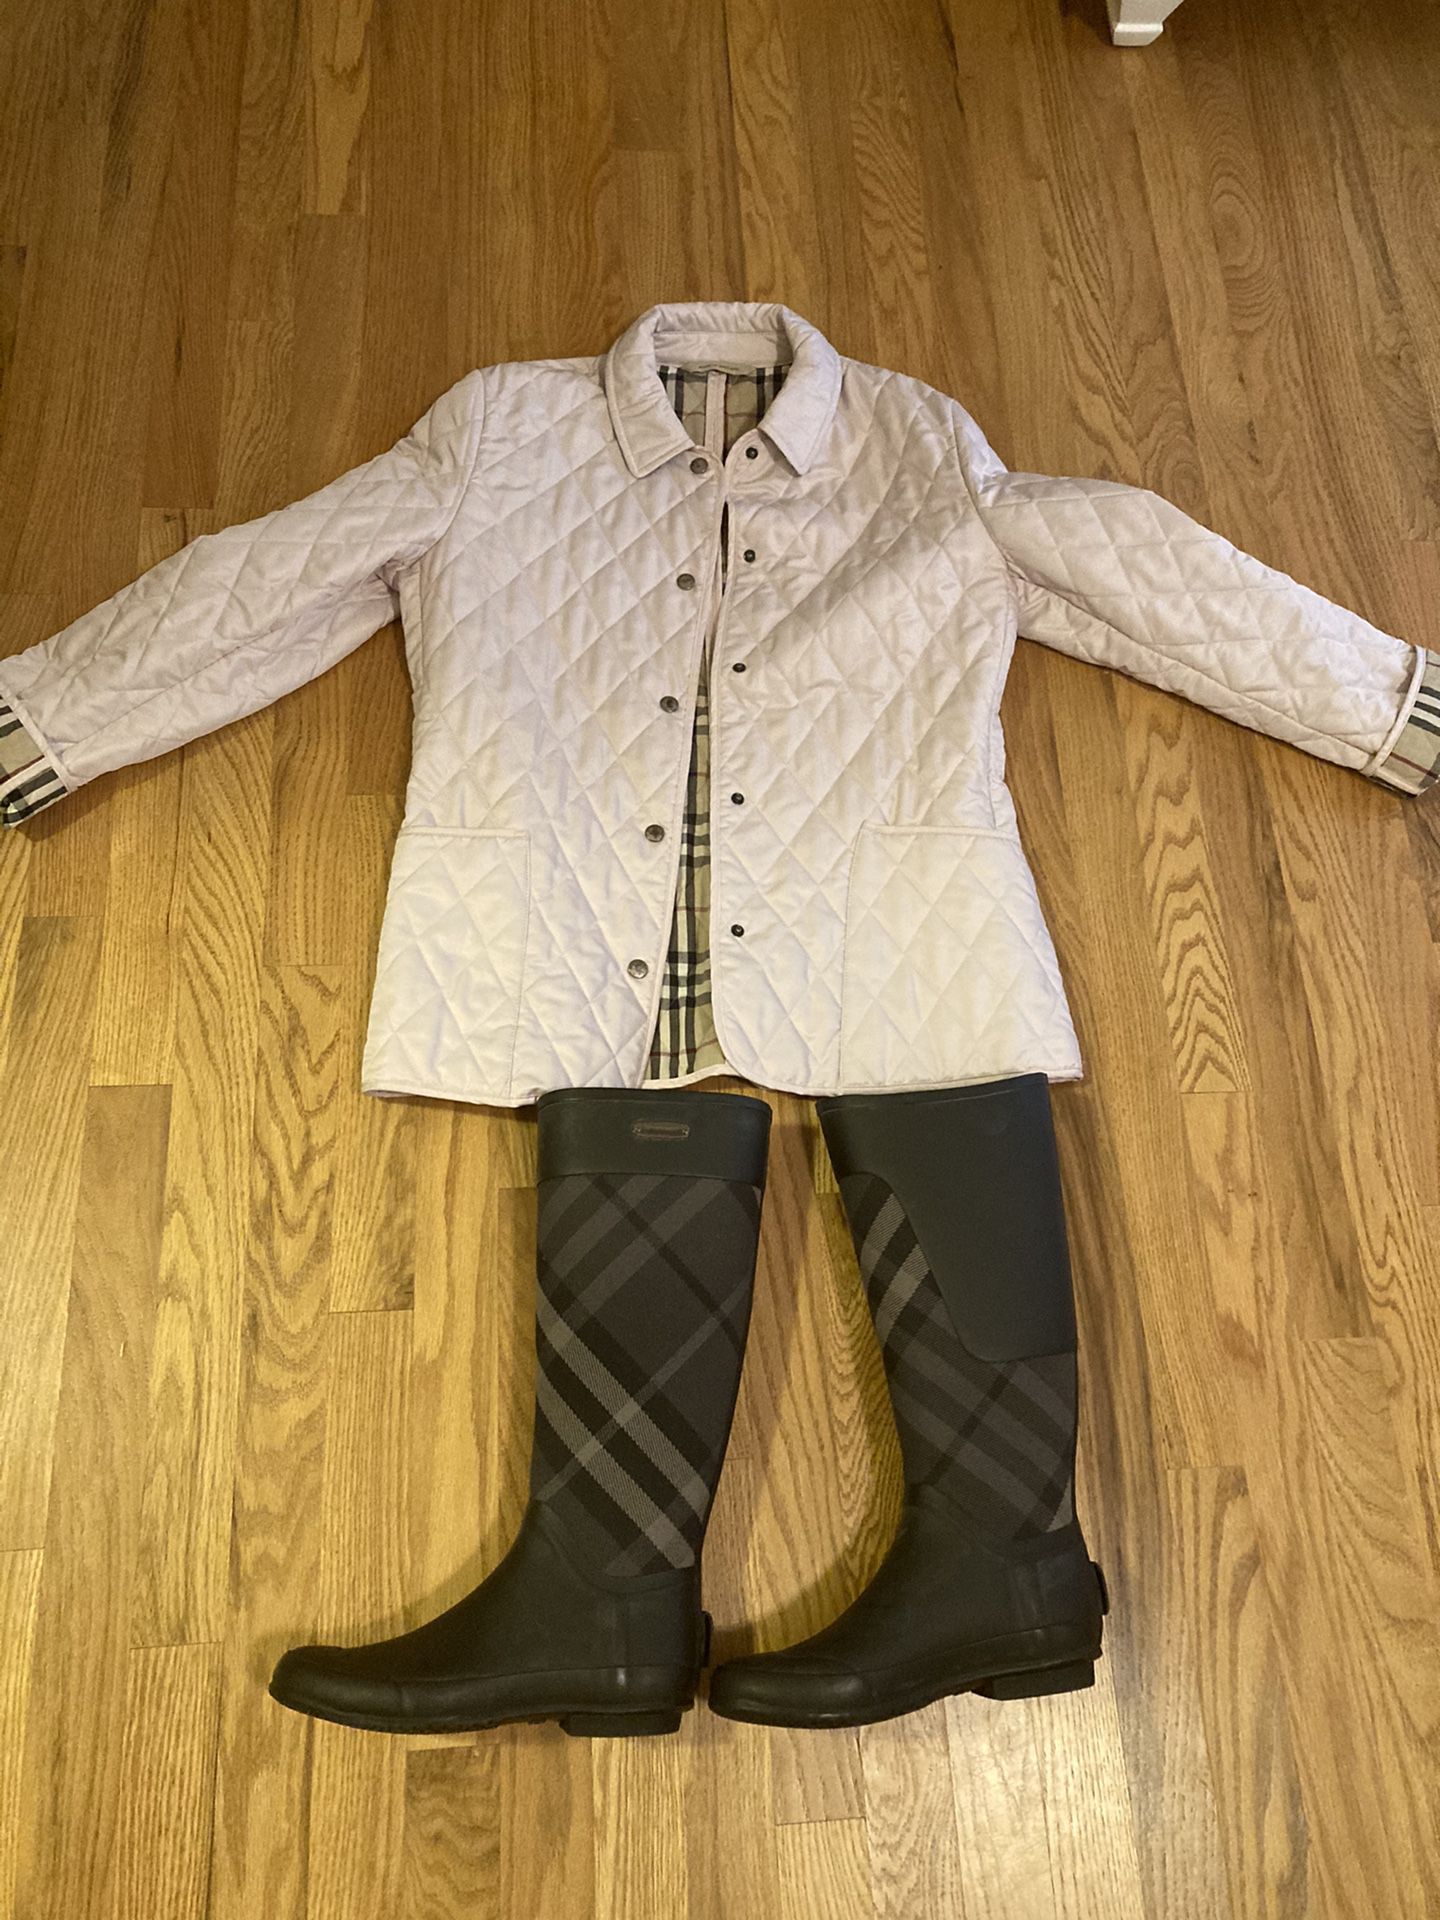 Burberry boots and jacket